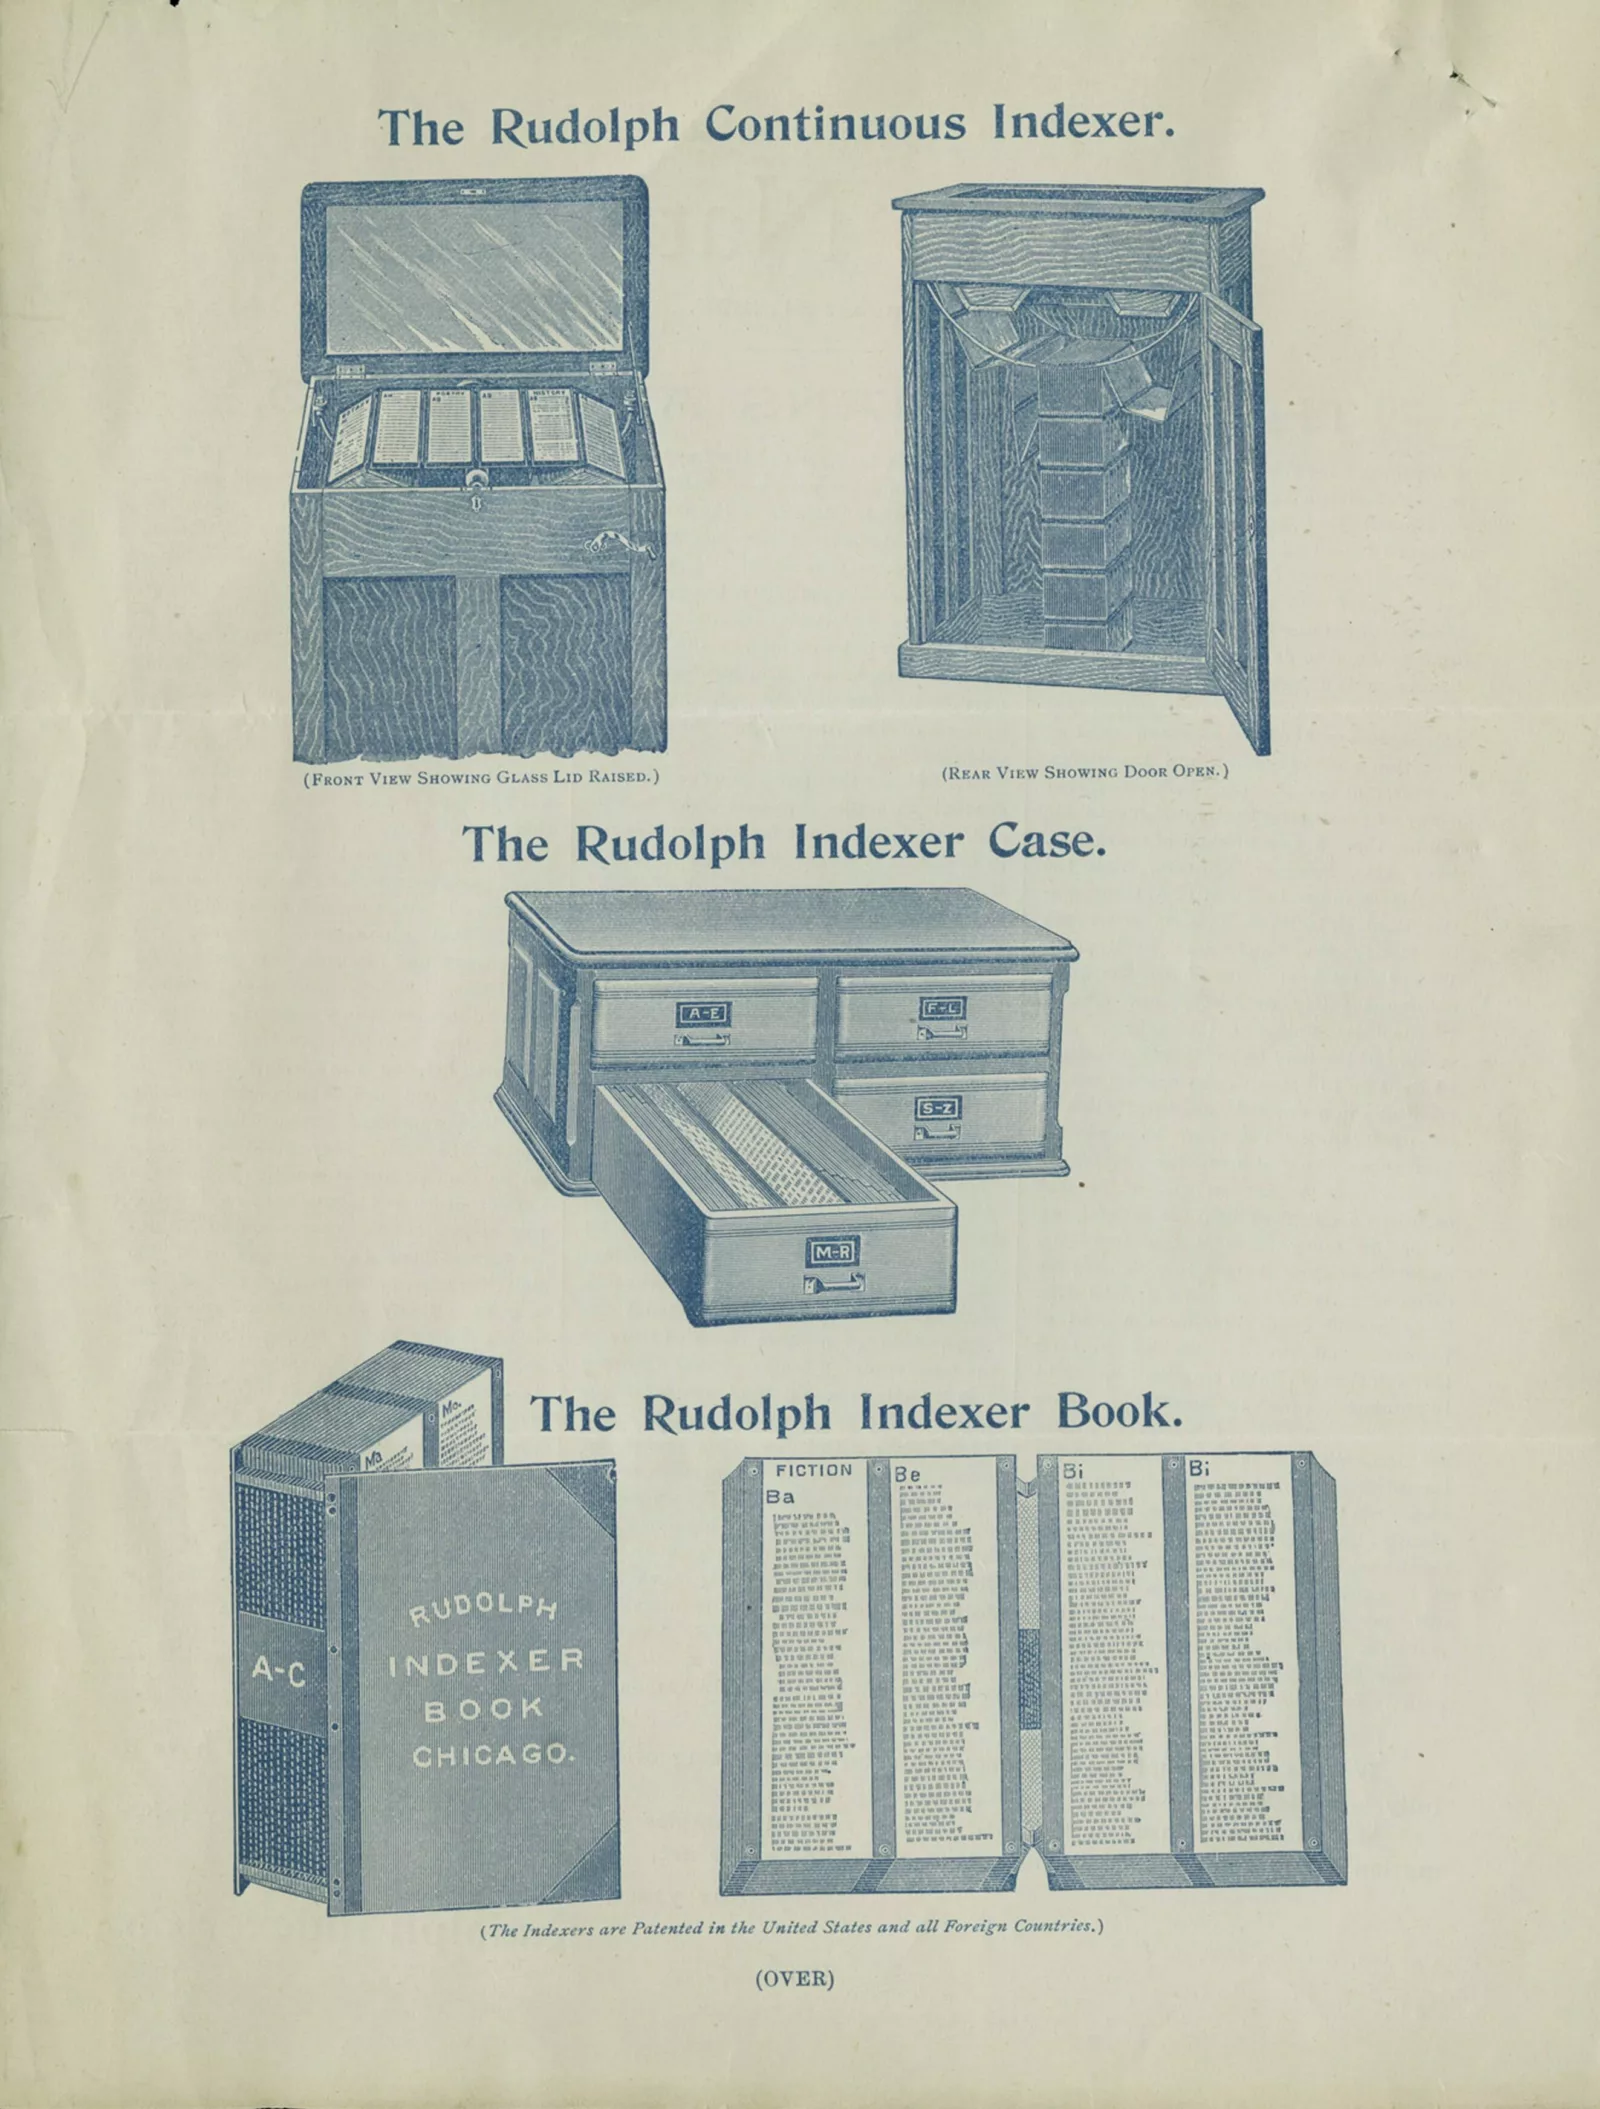 A promotional catalog from 1893 shows how the Rudolph Continuous Indexer was constructed.